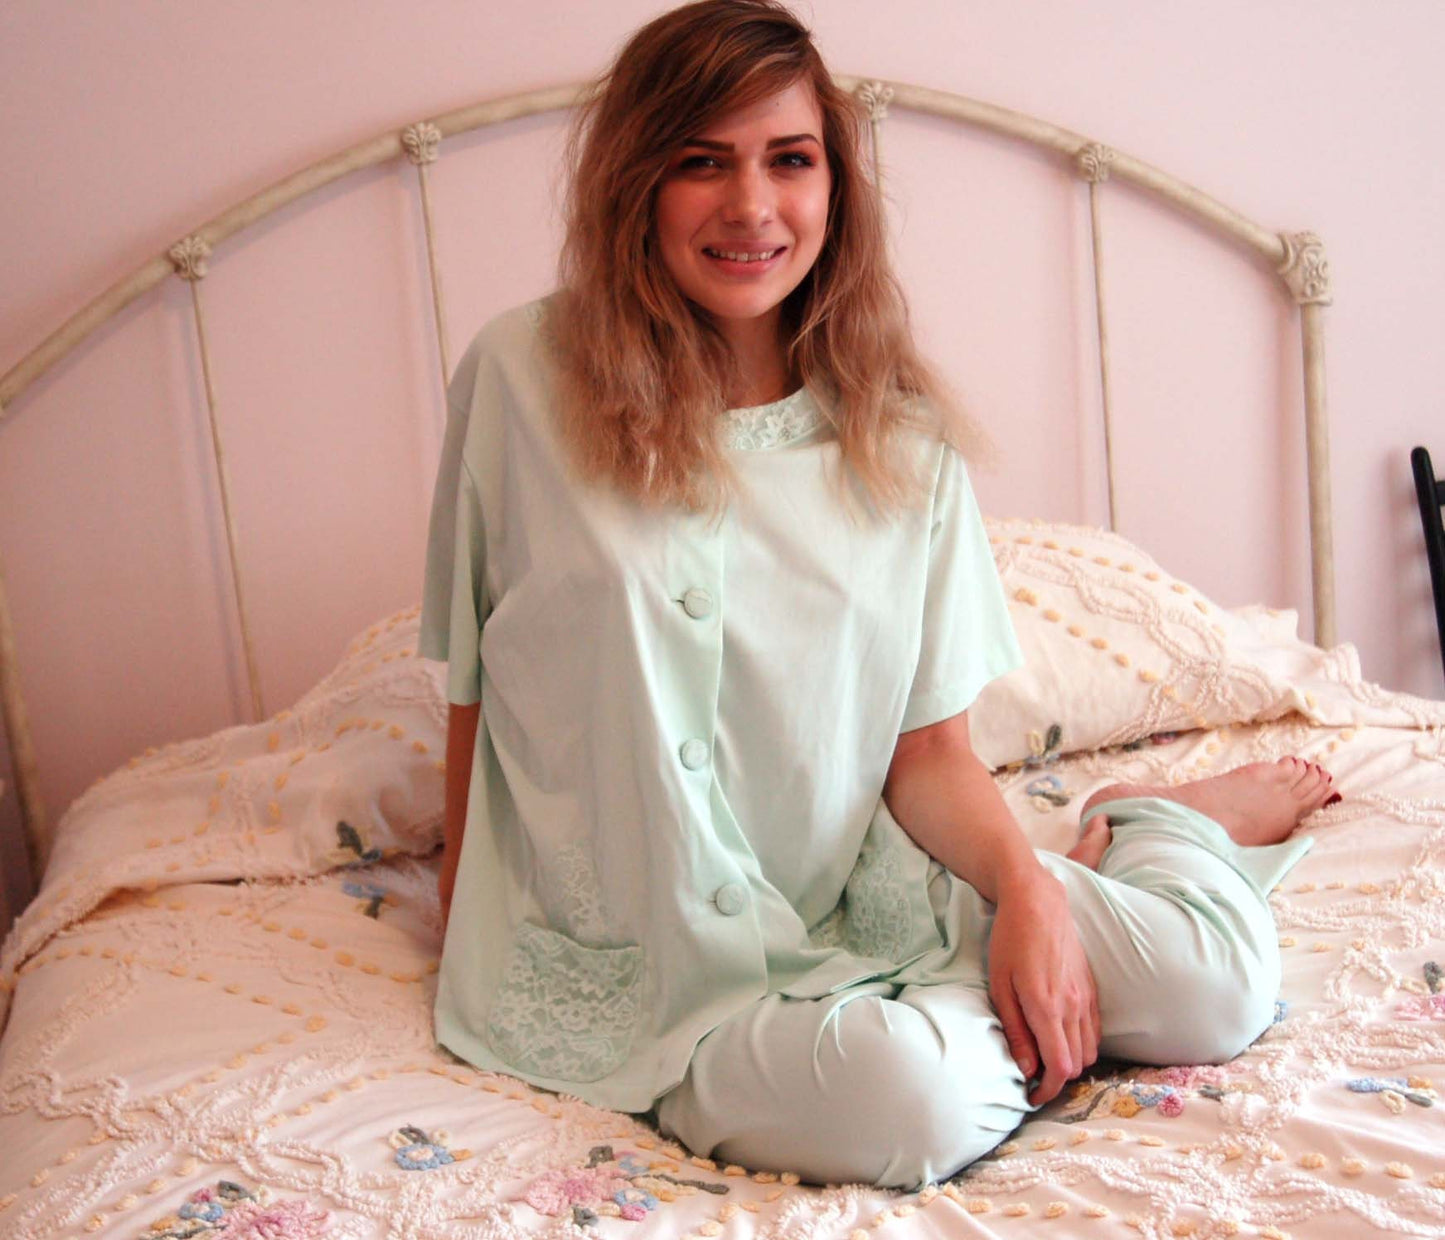 1960s pajamas nylon mint green with lace pockets and collar Elastic waist Size L